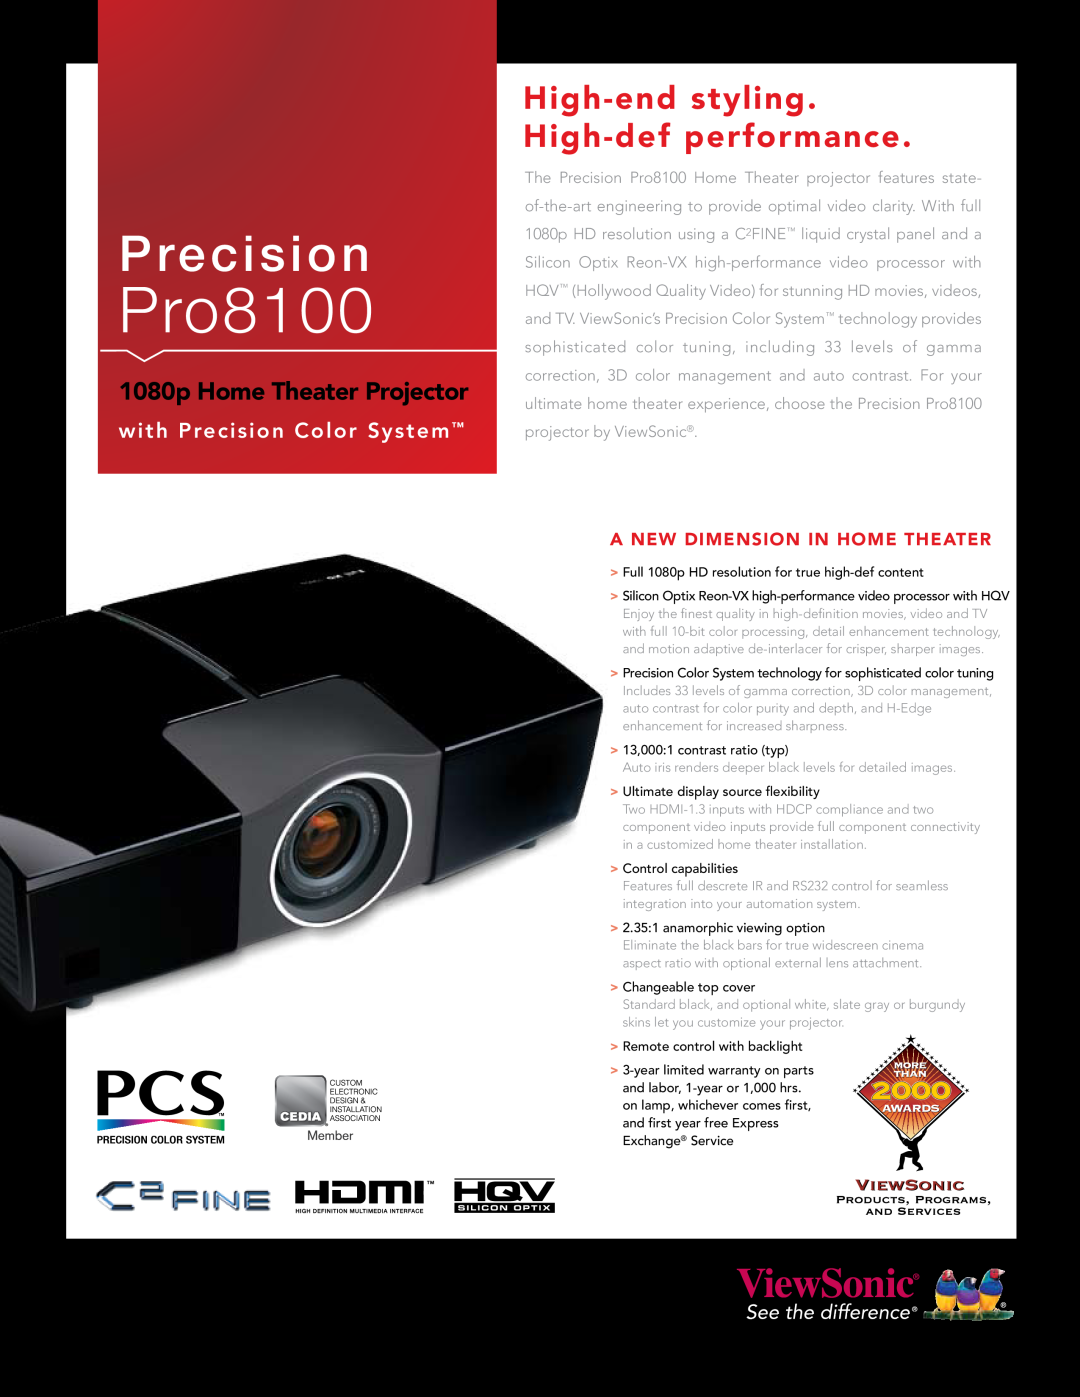 ViewSonic Pro8100 warranty P re c i s i o n, High-endstyling. High-defperformance, 1080p Home Theater Projector 